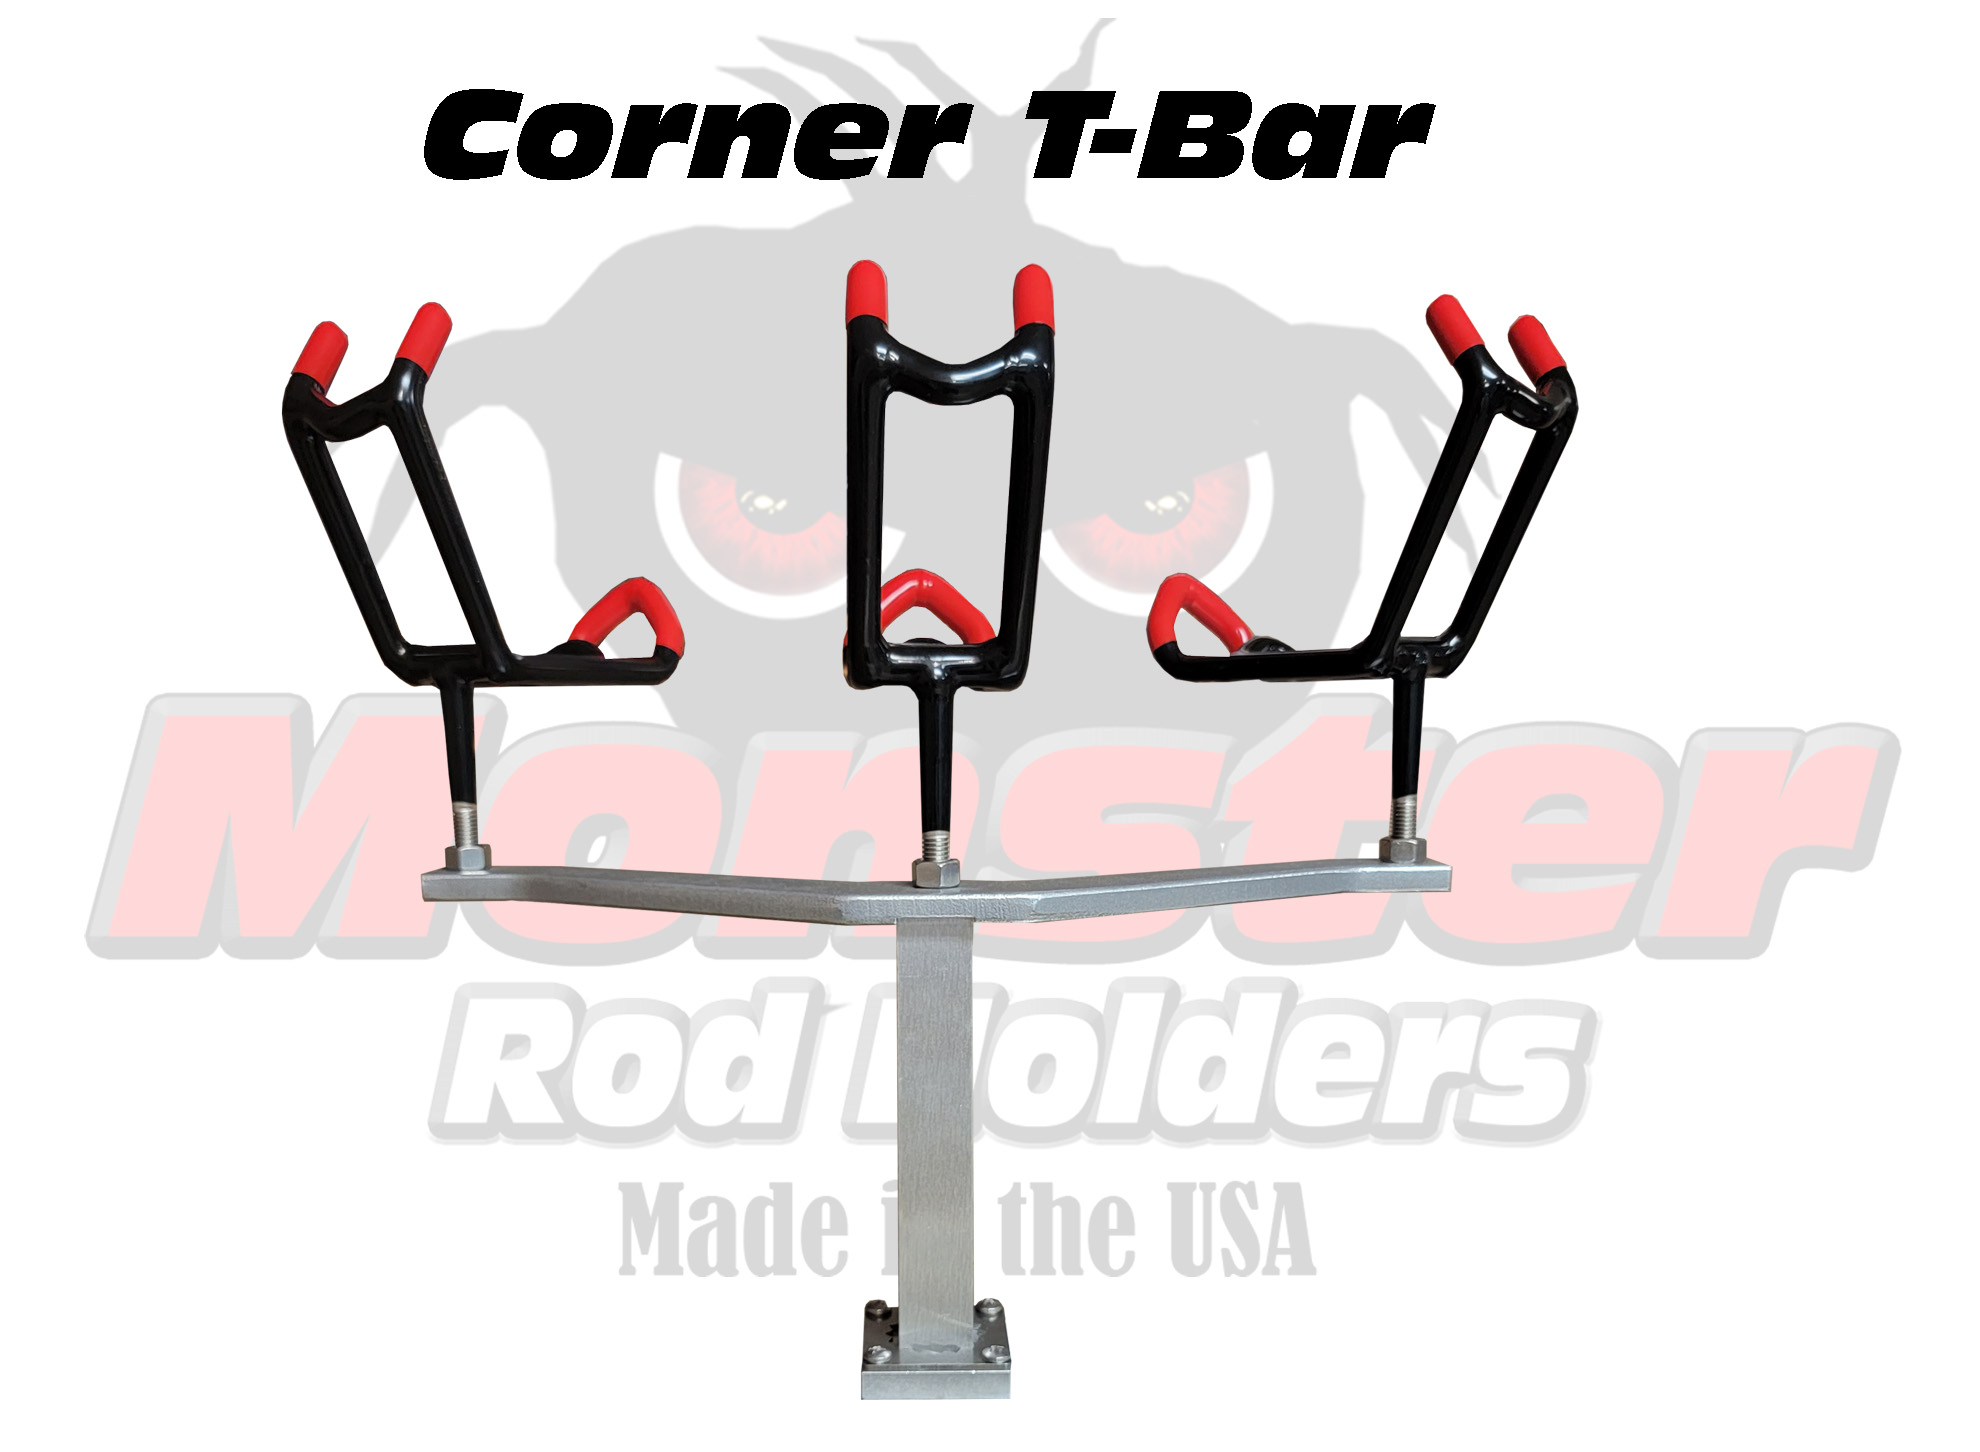 Ideas for either a rod rack or T bars for trolling